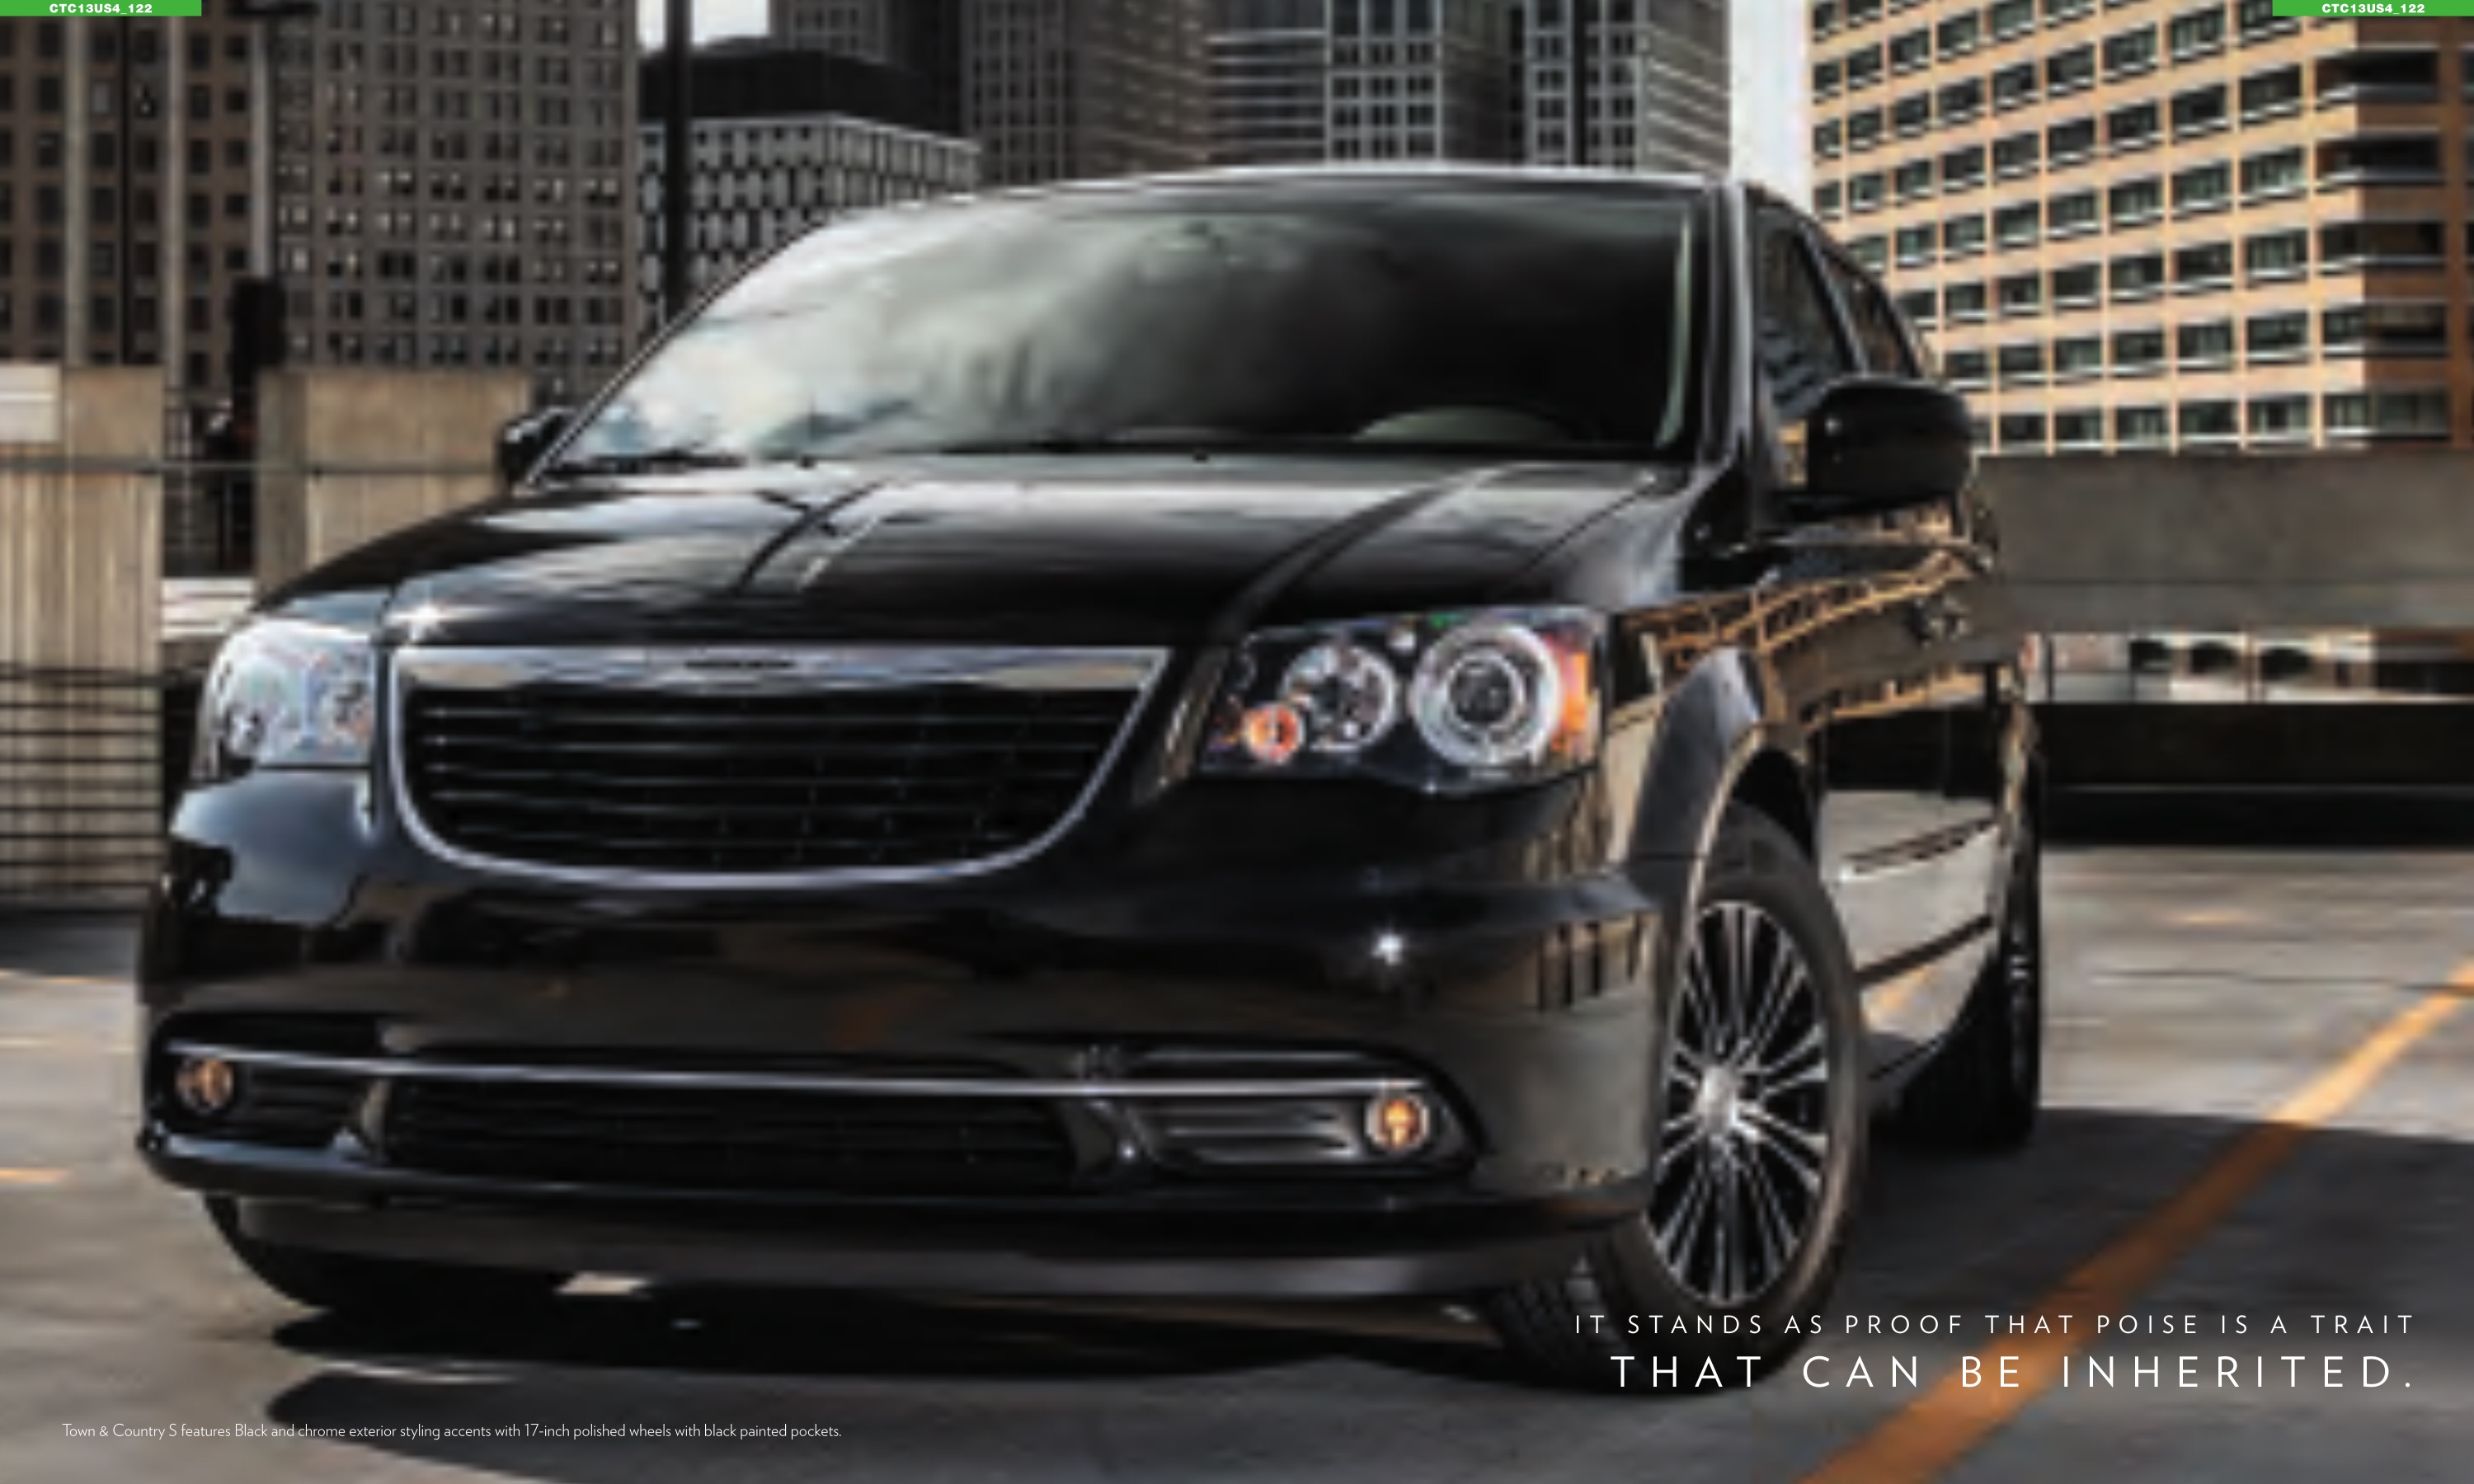 2014 Chrysler Town & Country Brochure Page 5